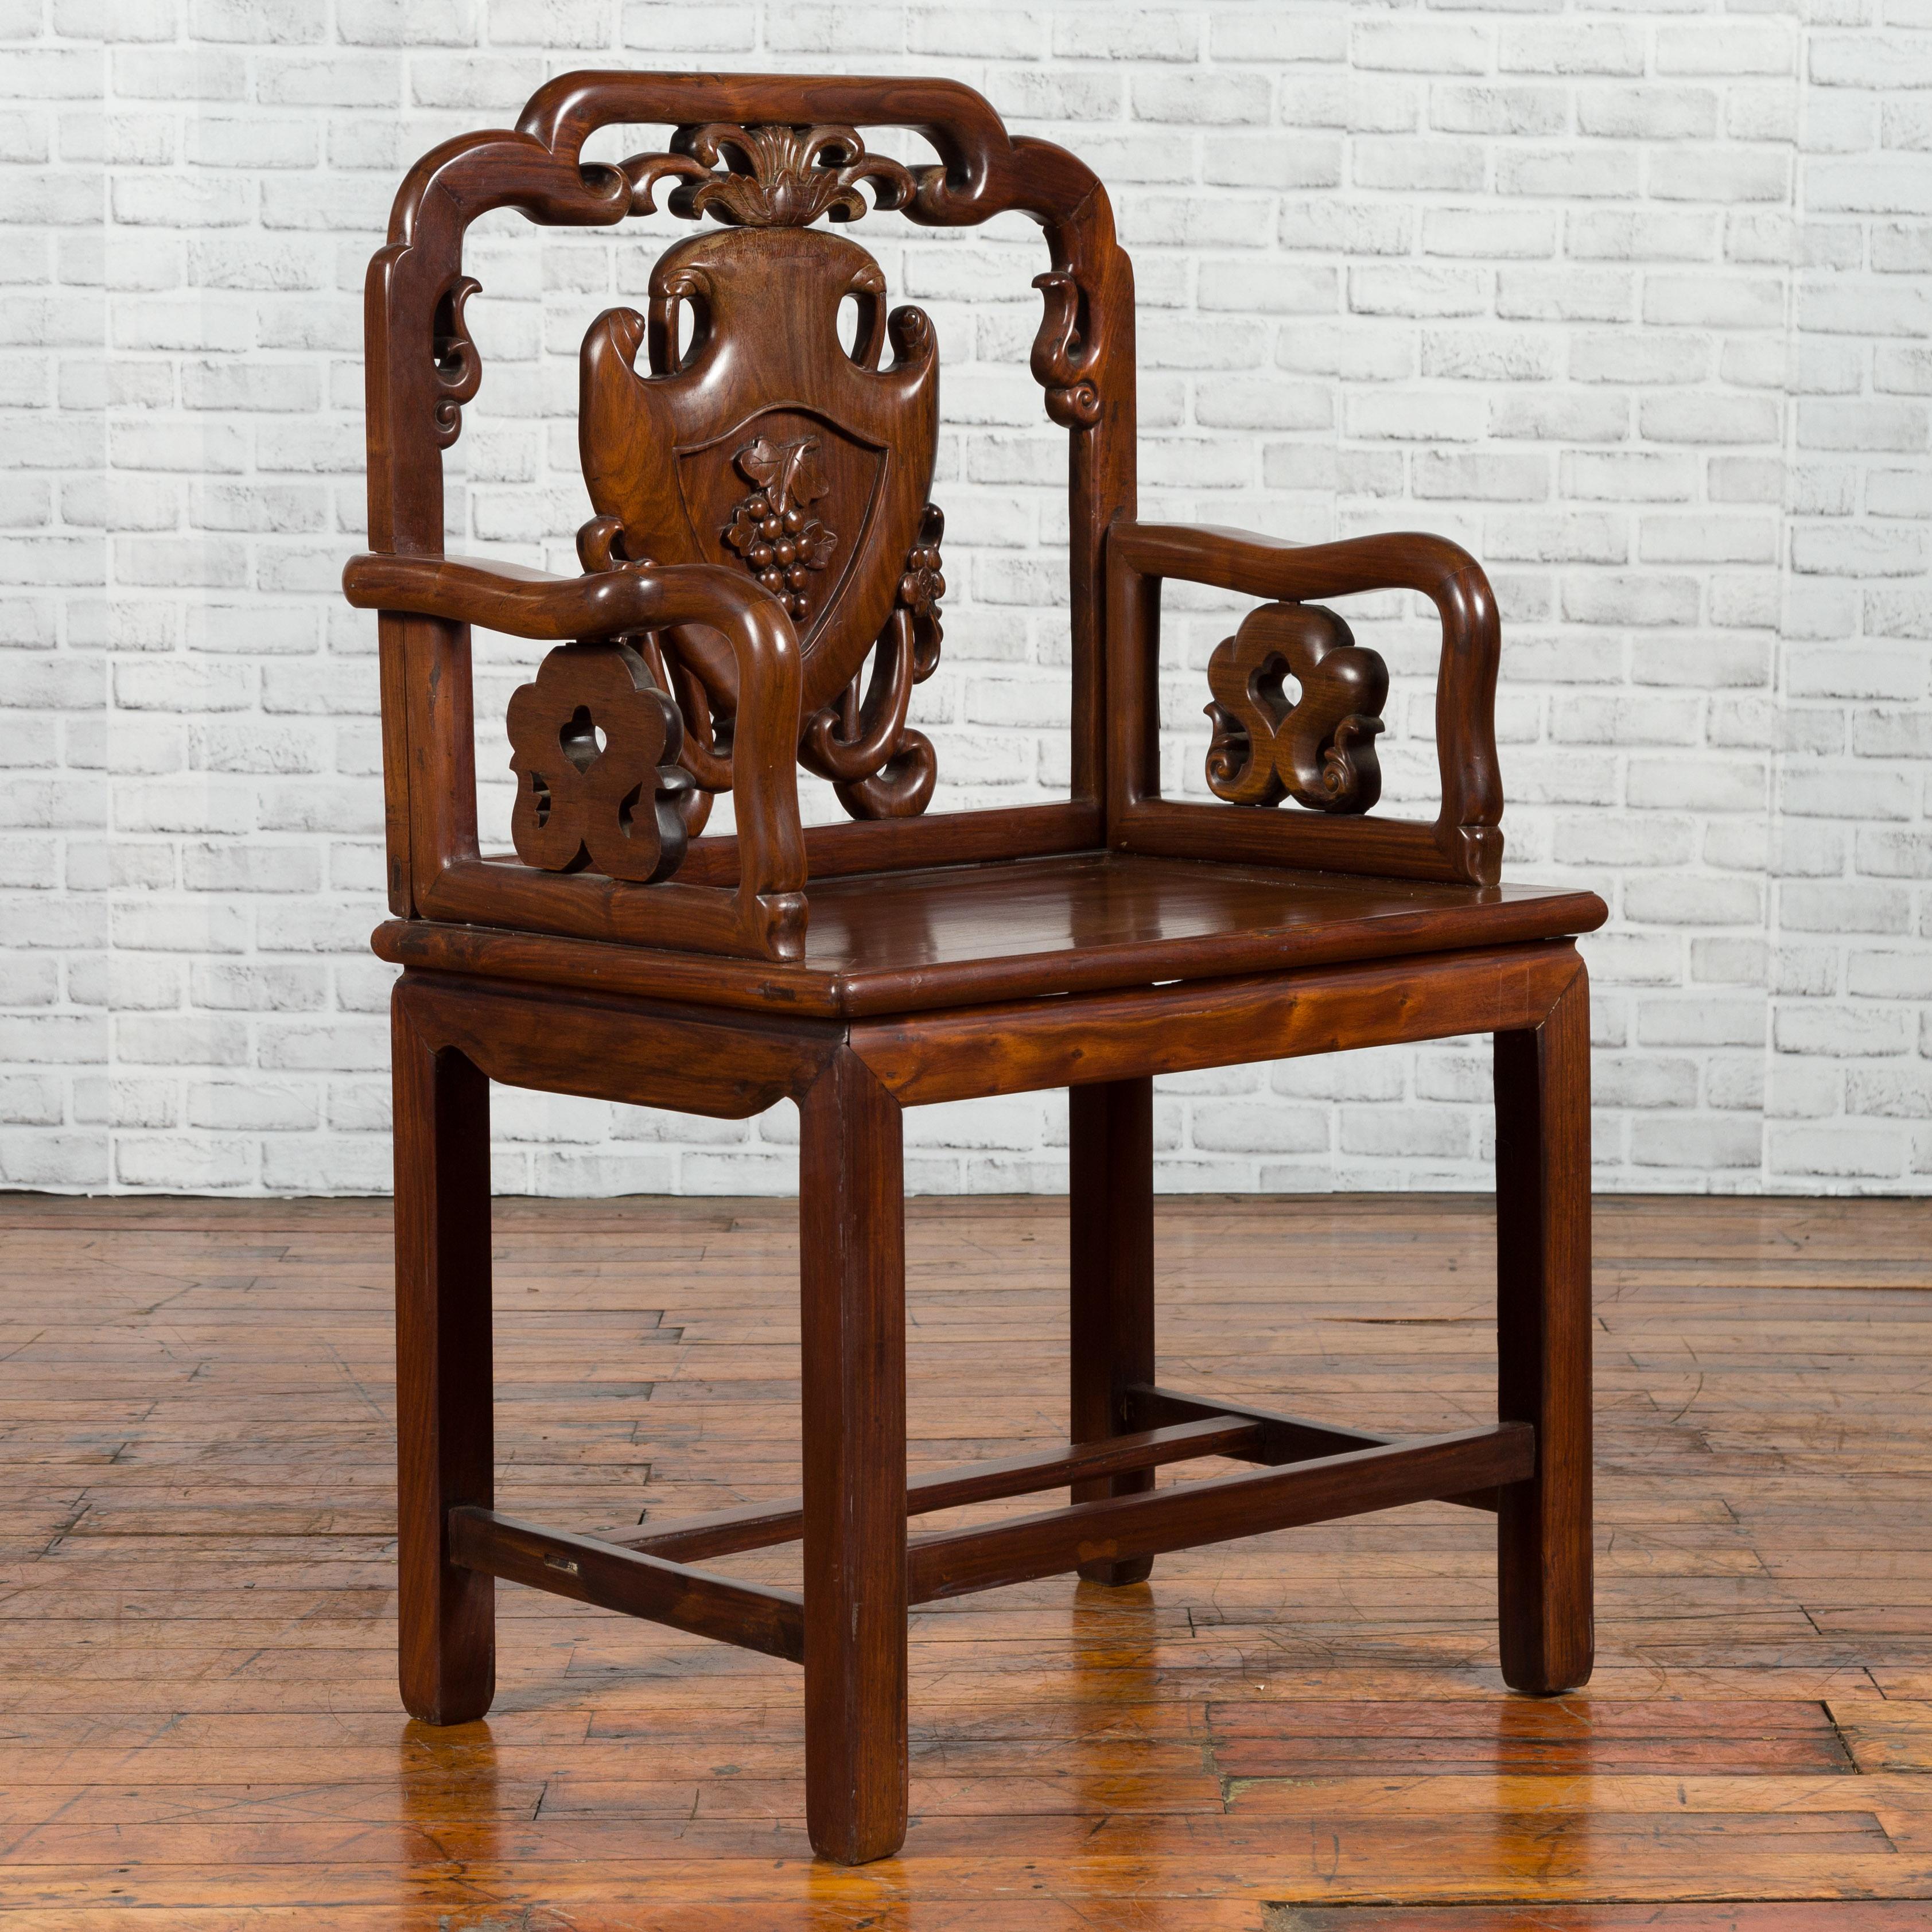 A Chinese Qing Dynasty period rosewood armchair from the 19th century, with hand carved splat and arm supports. Created in China during the 19th century, this rosewood chair attracts our attention with its stunning back, adorned with grapes carved